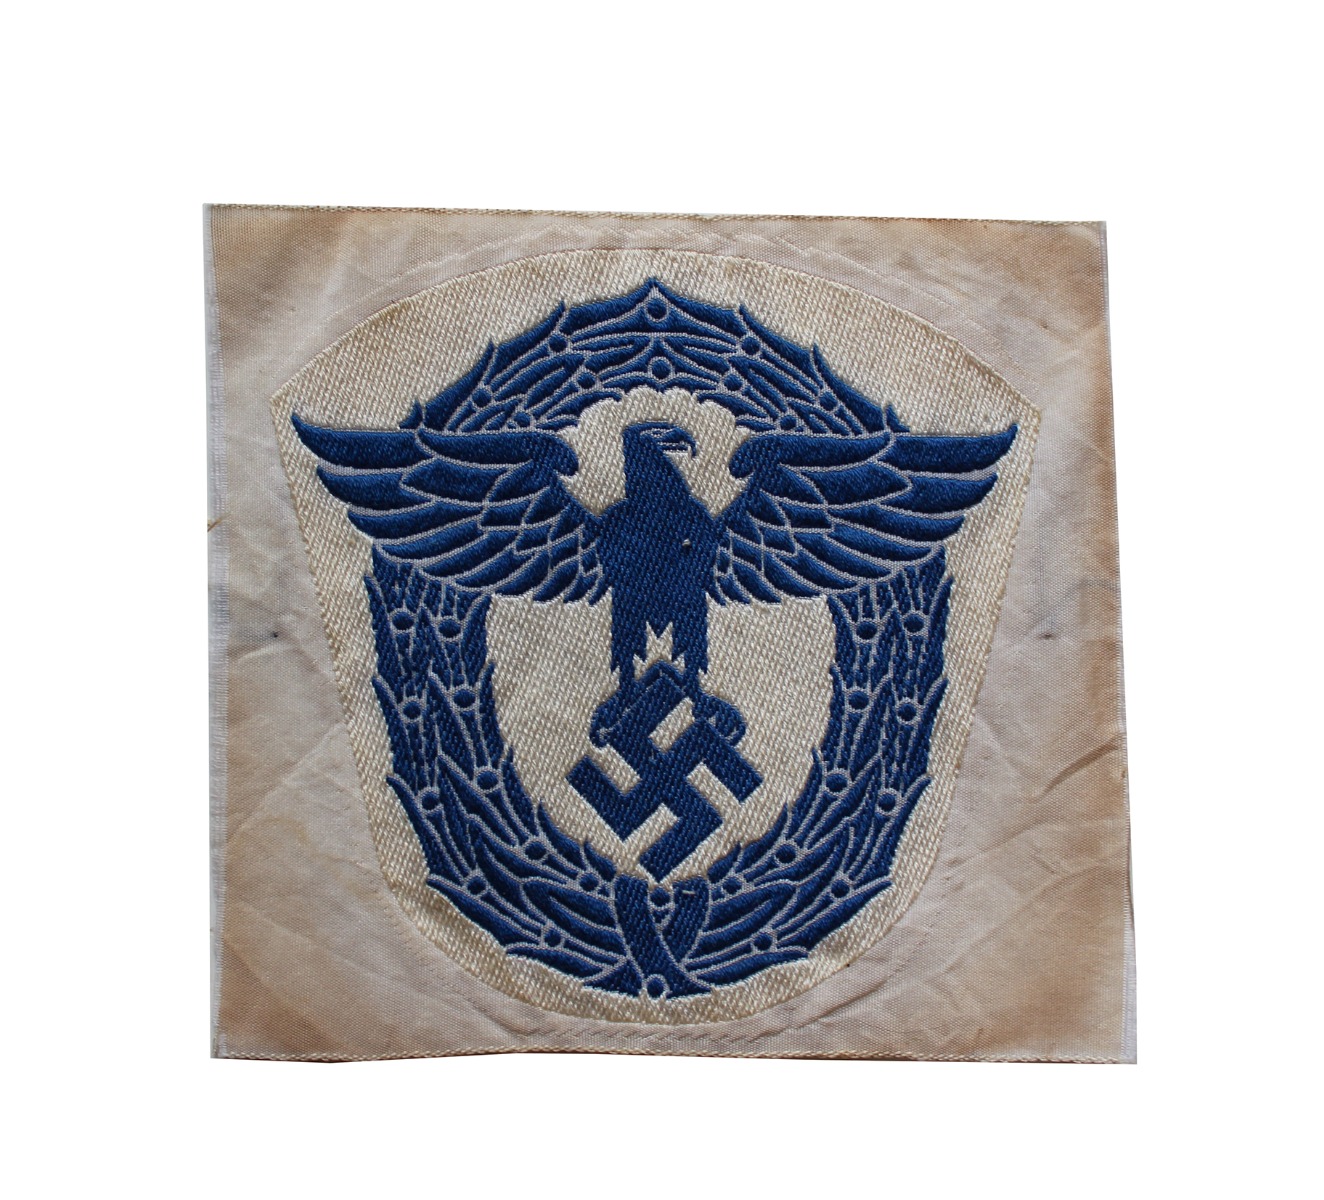 GERMAN WWII WATER POLICE SPORTS SHIRT INSIGNIA 